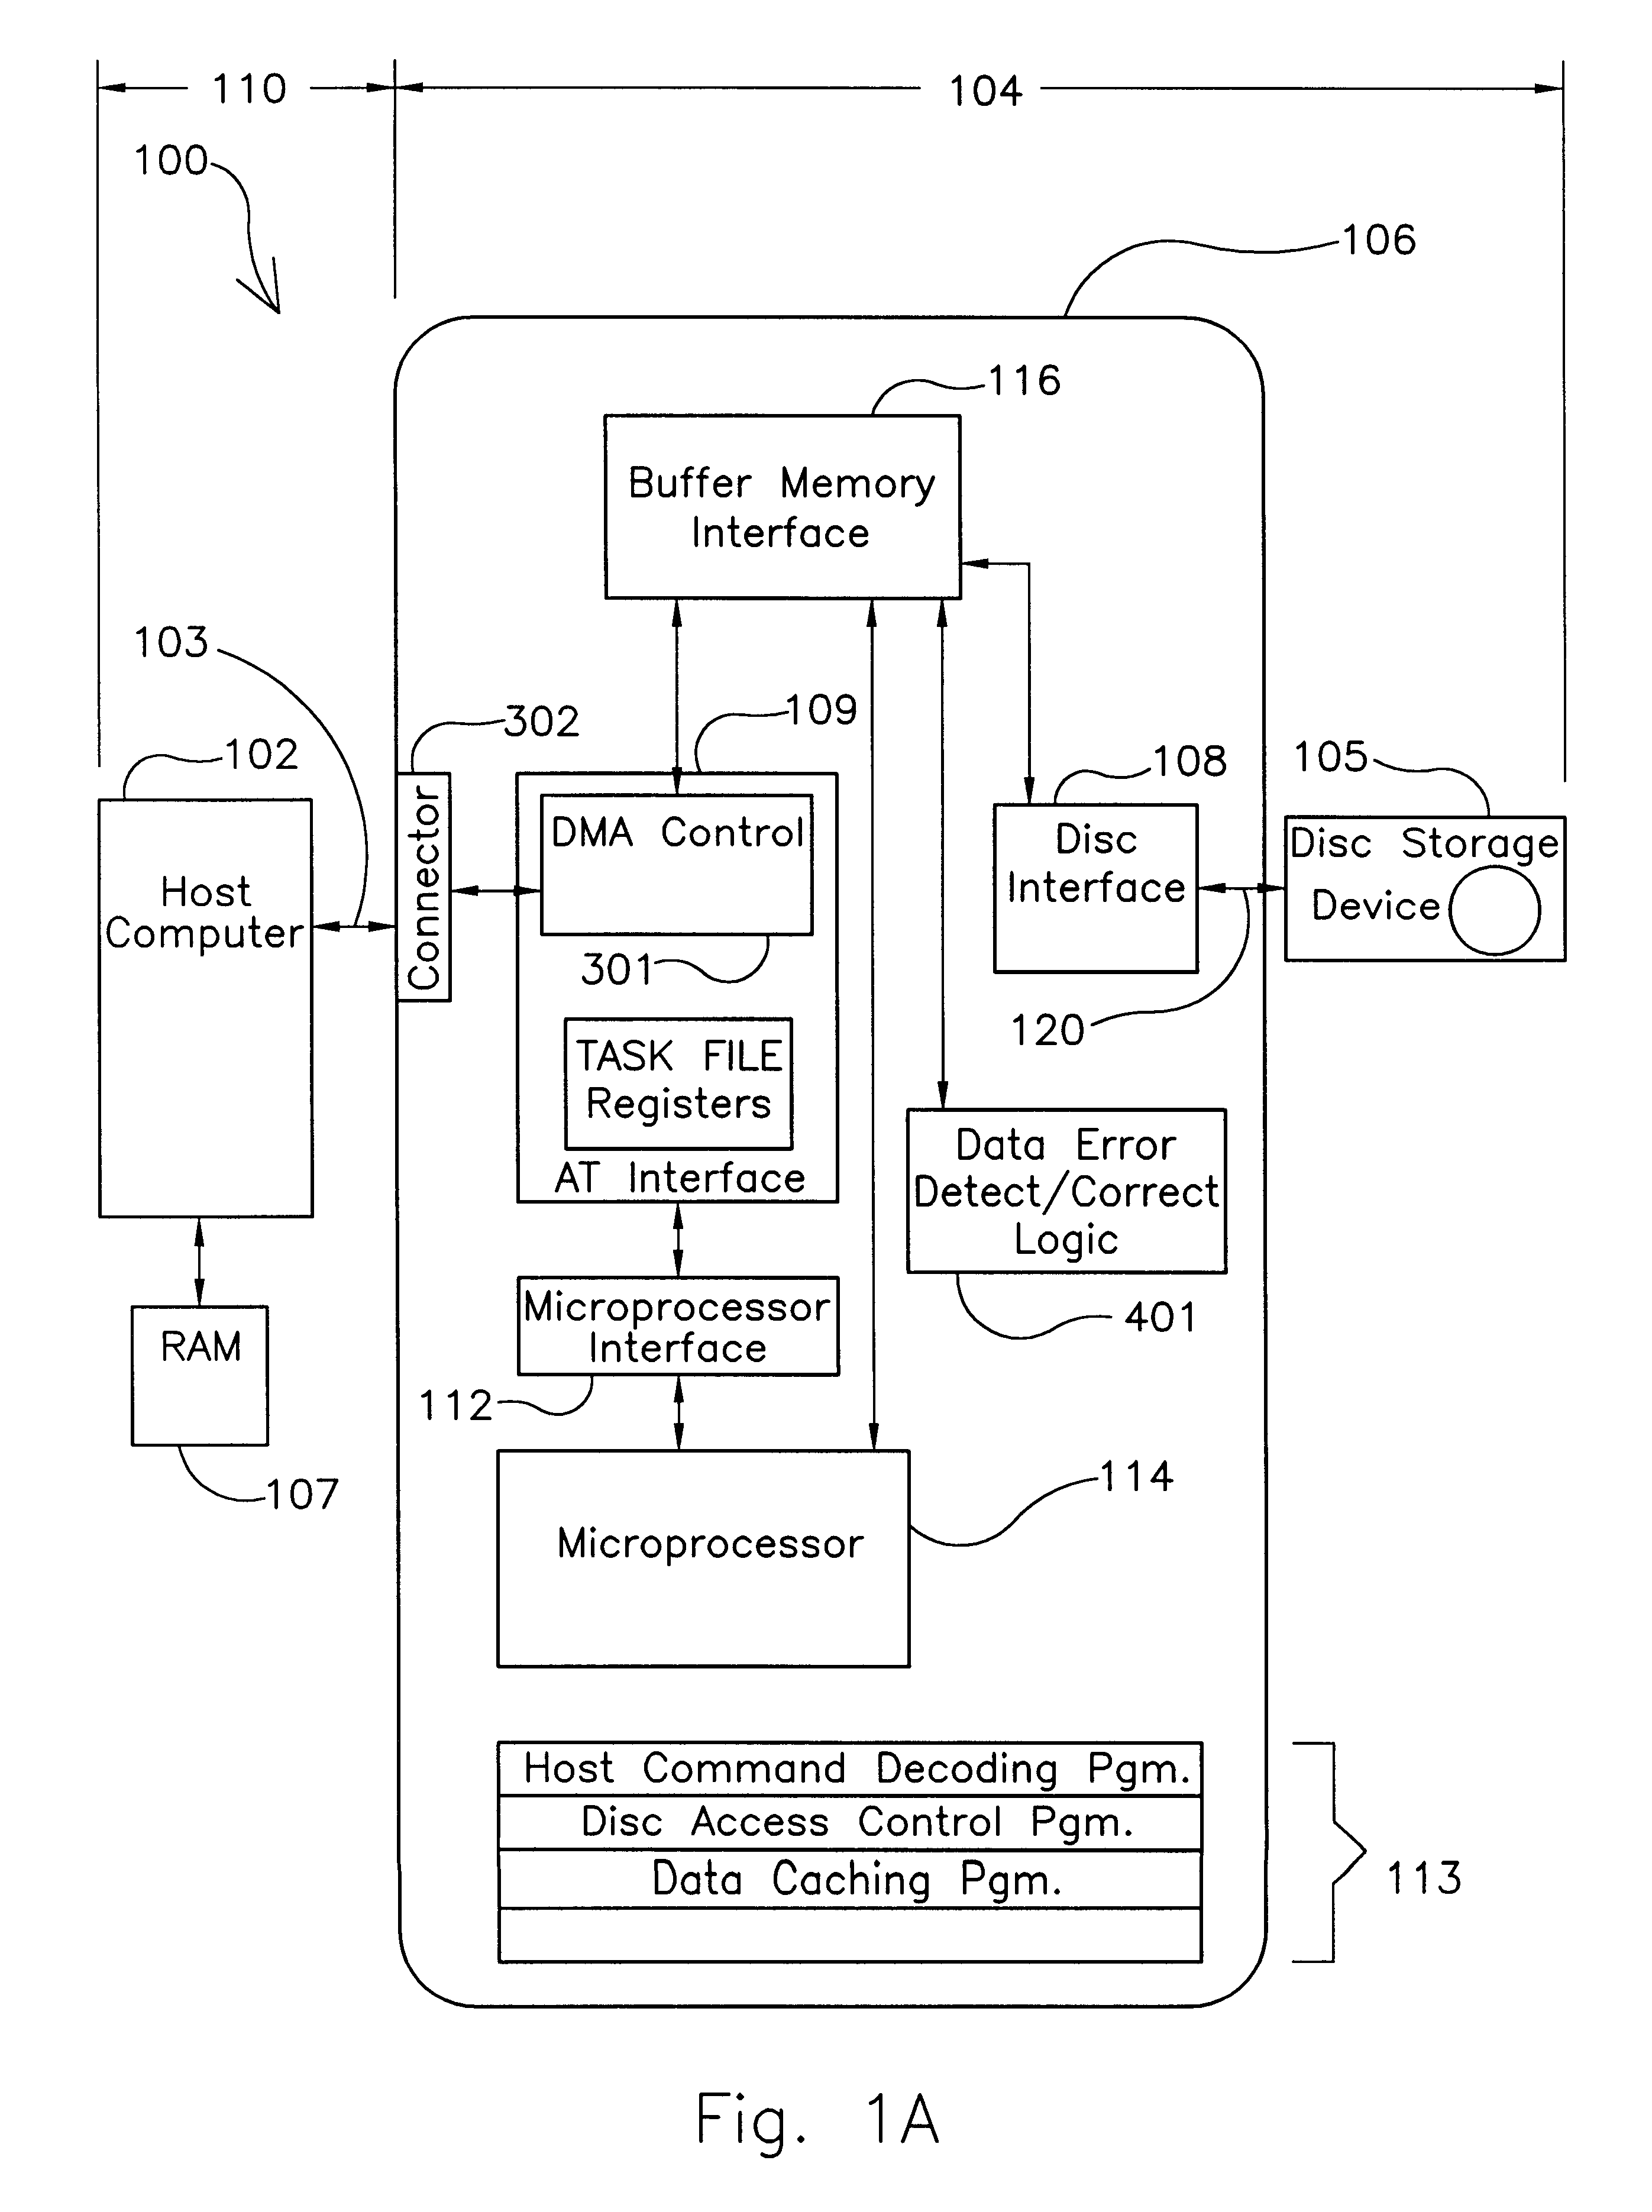 Fast ATA-compatible drive interface with error detection and/or error correction